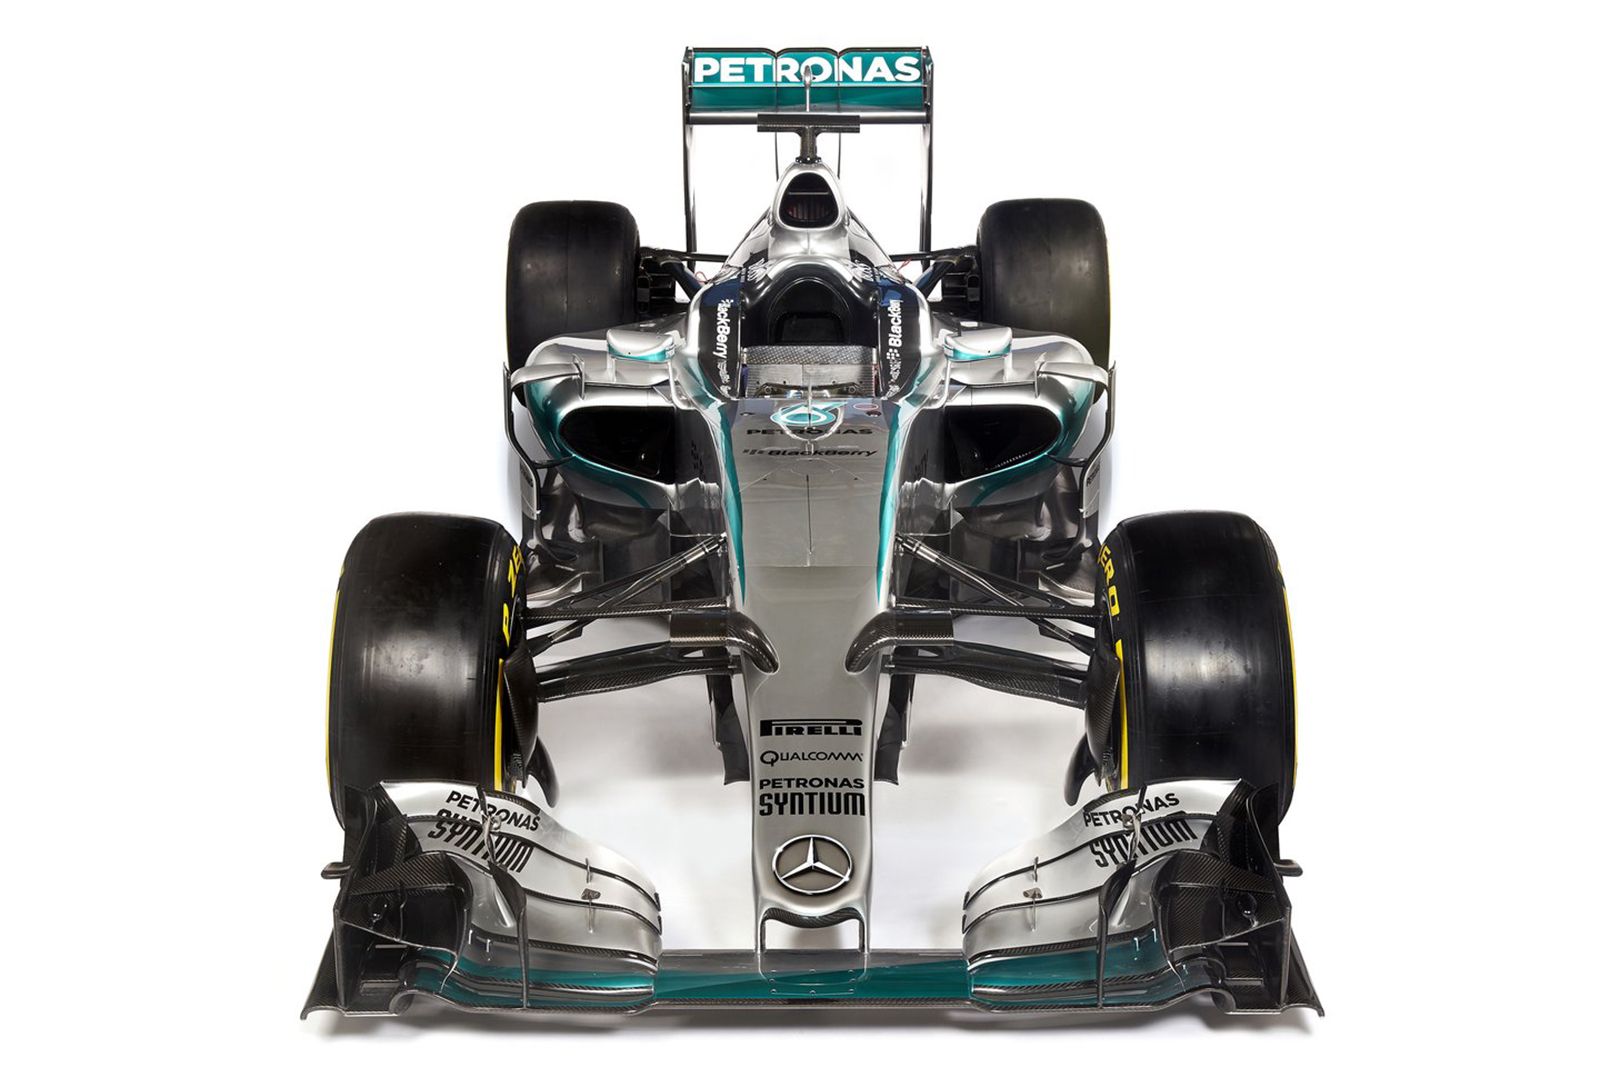 formula 1 2015 what’s new cars rules and changes explained image 14